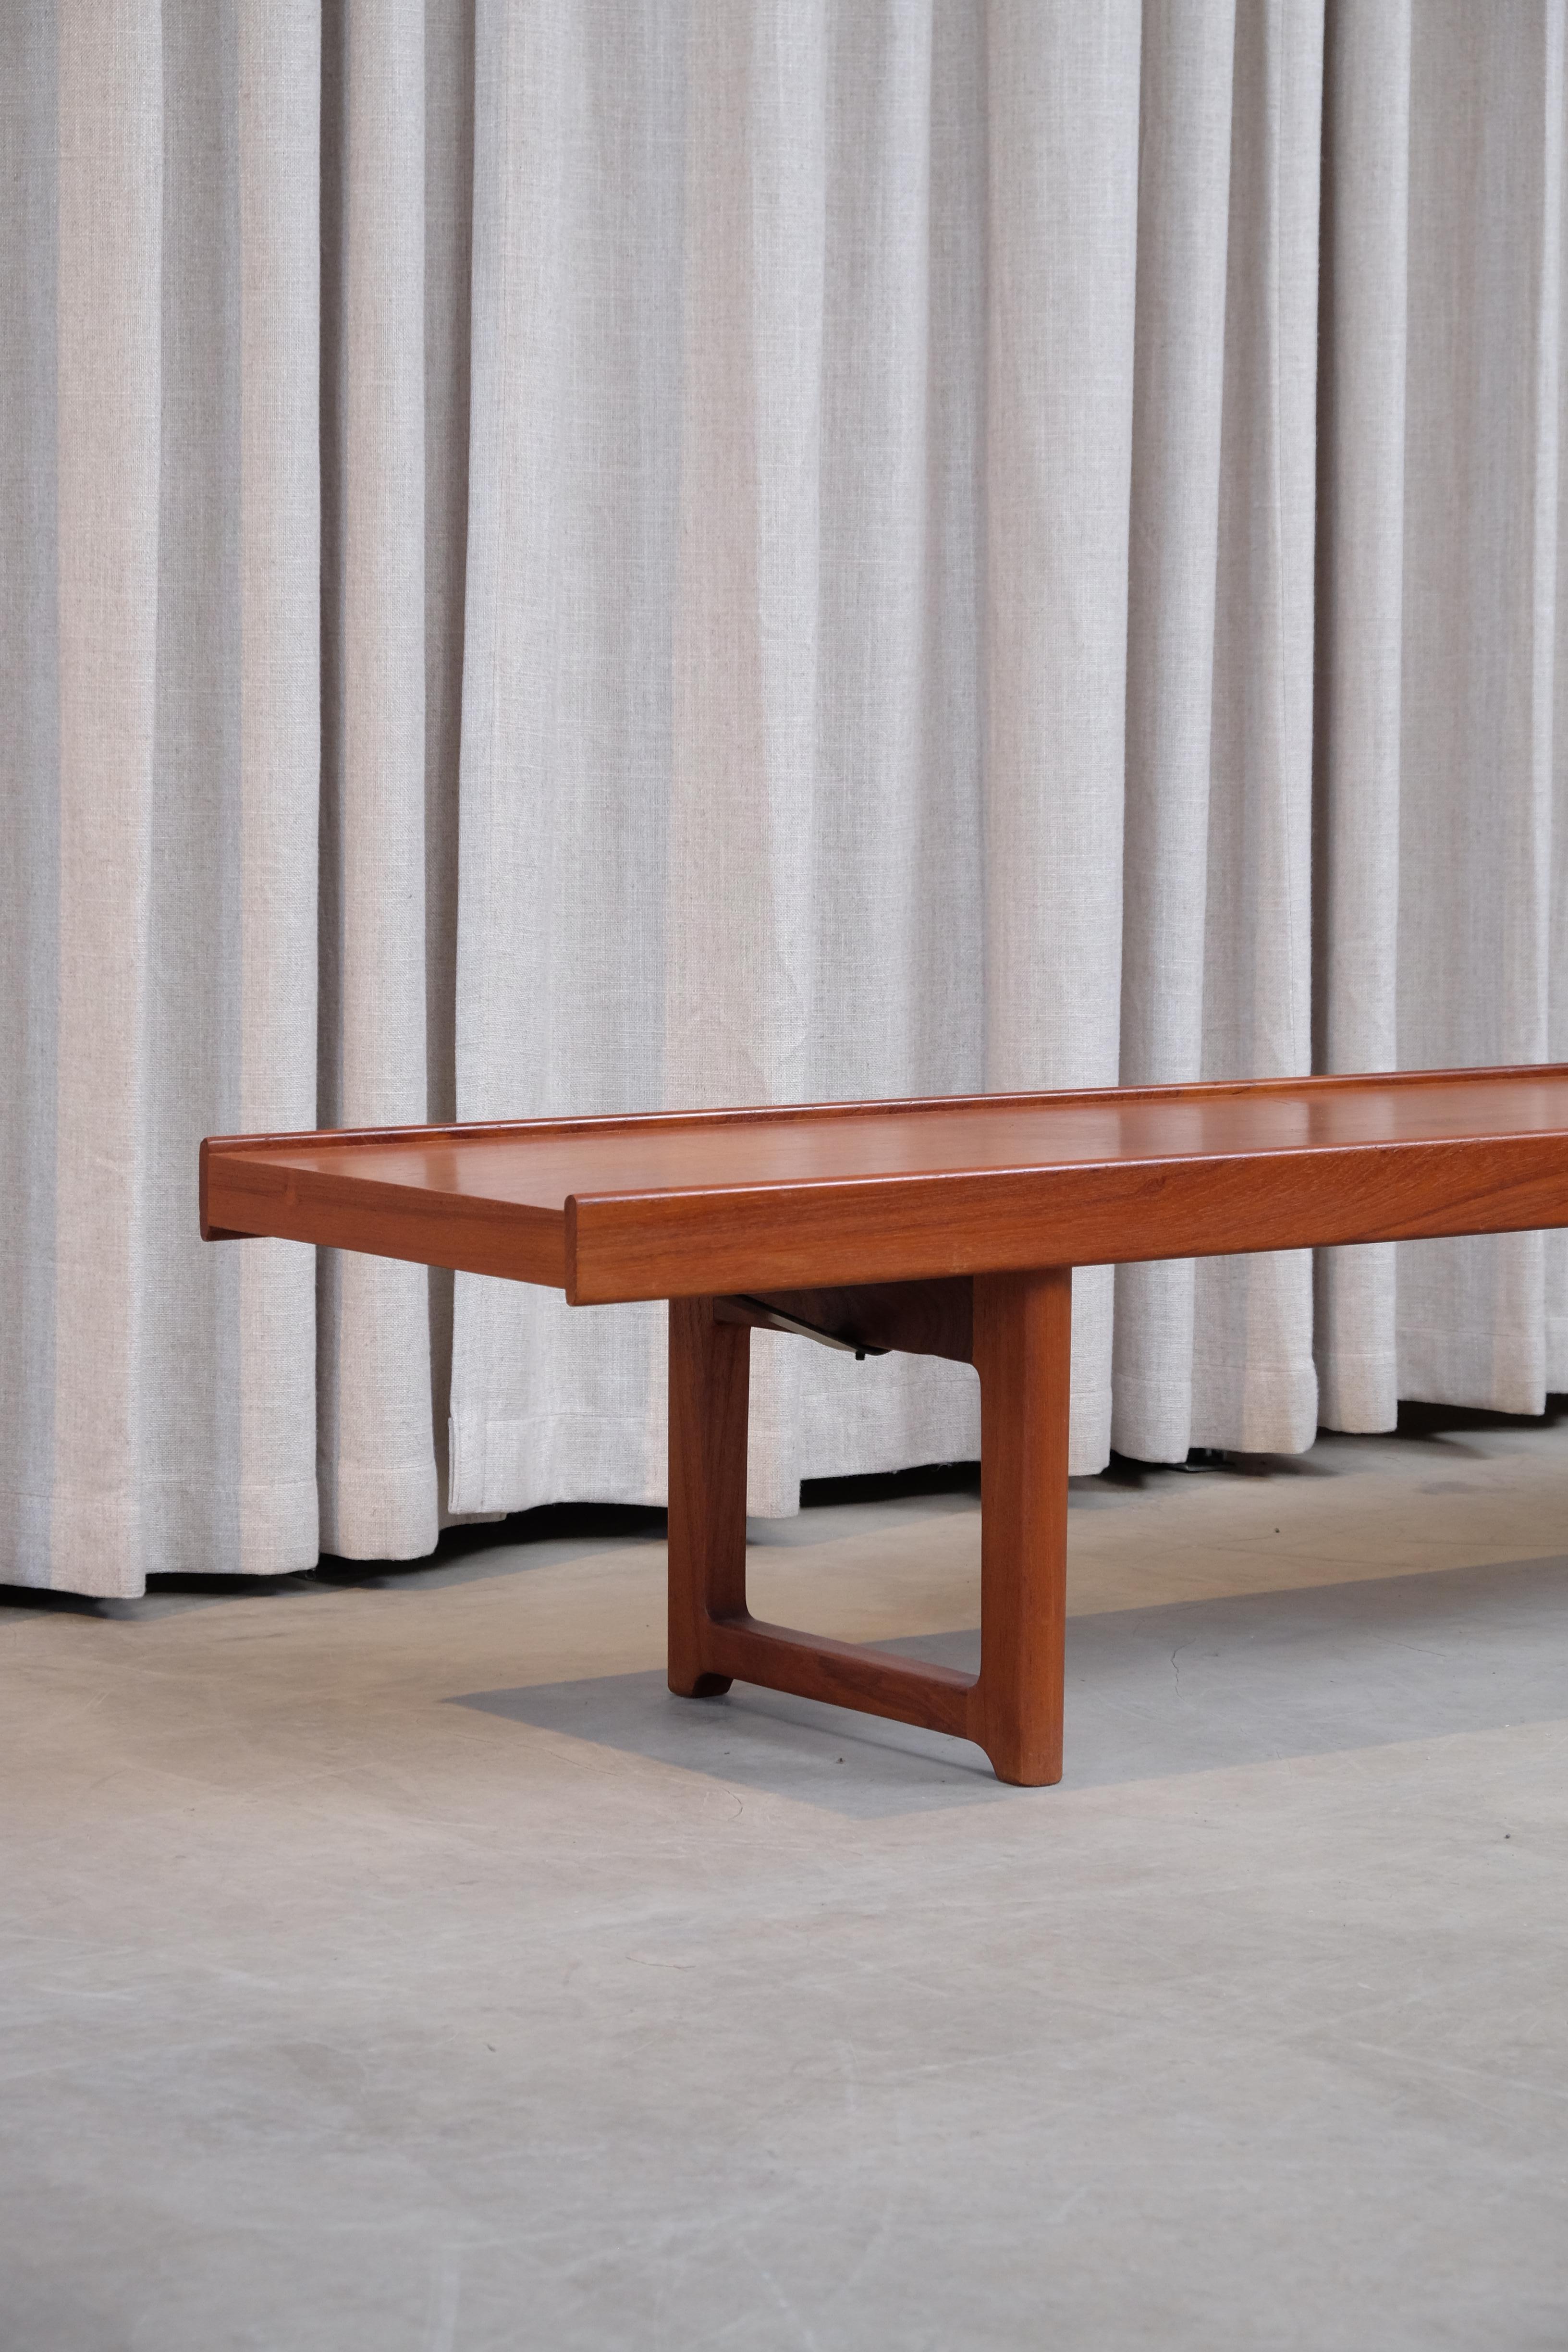 A Scandinavian Modern bench in a simple plank form in teak with two raised edges then resting on legs that join at the floor creating U-shaped pedestal bases. By Torbjörn Afdal for Mellemstrands Trevareindustri and distributed by Bruksbo Møbler,